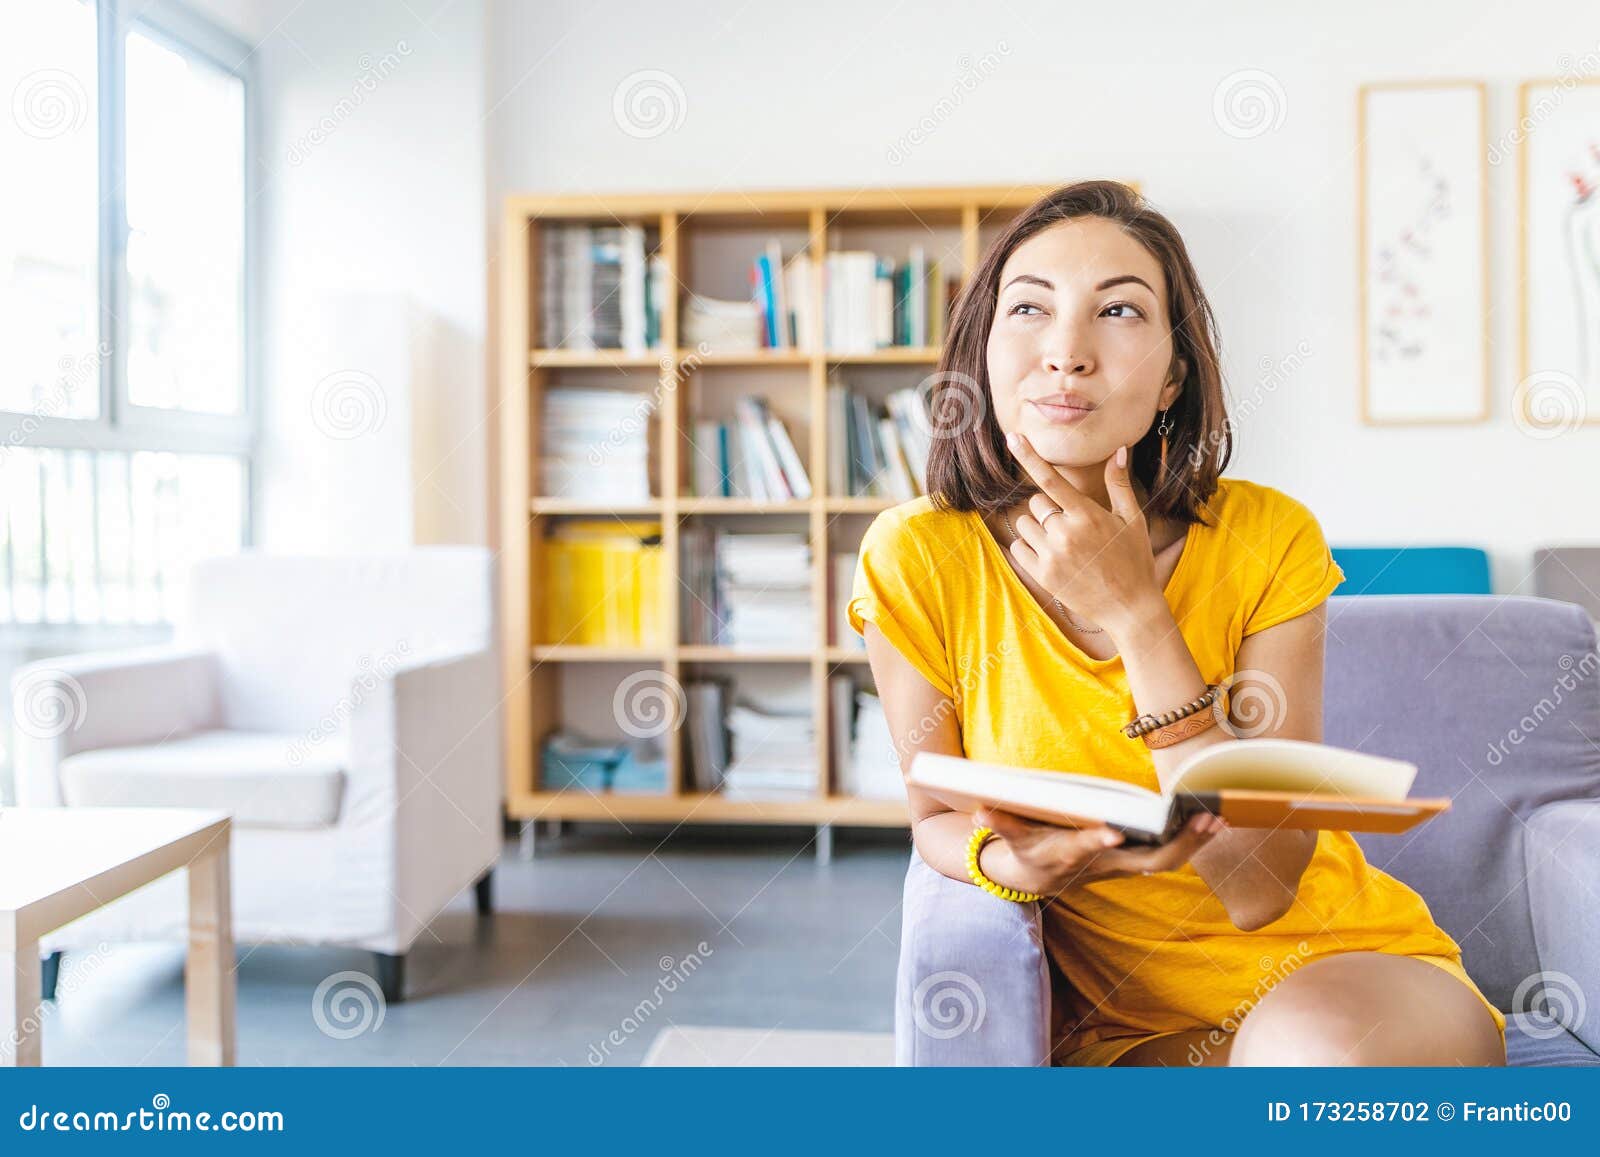 happy student woman thinking and having interesting idea while reading book in library